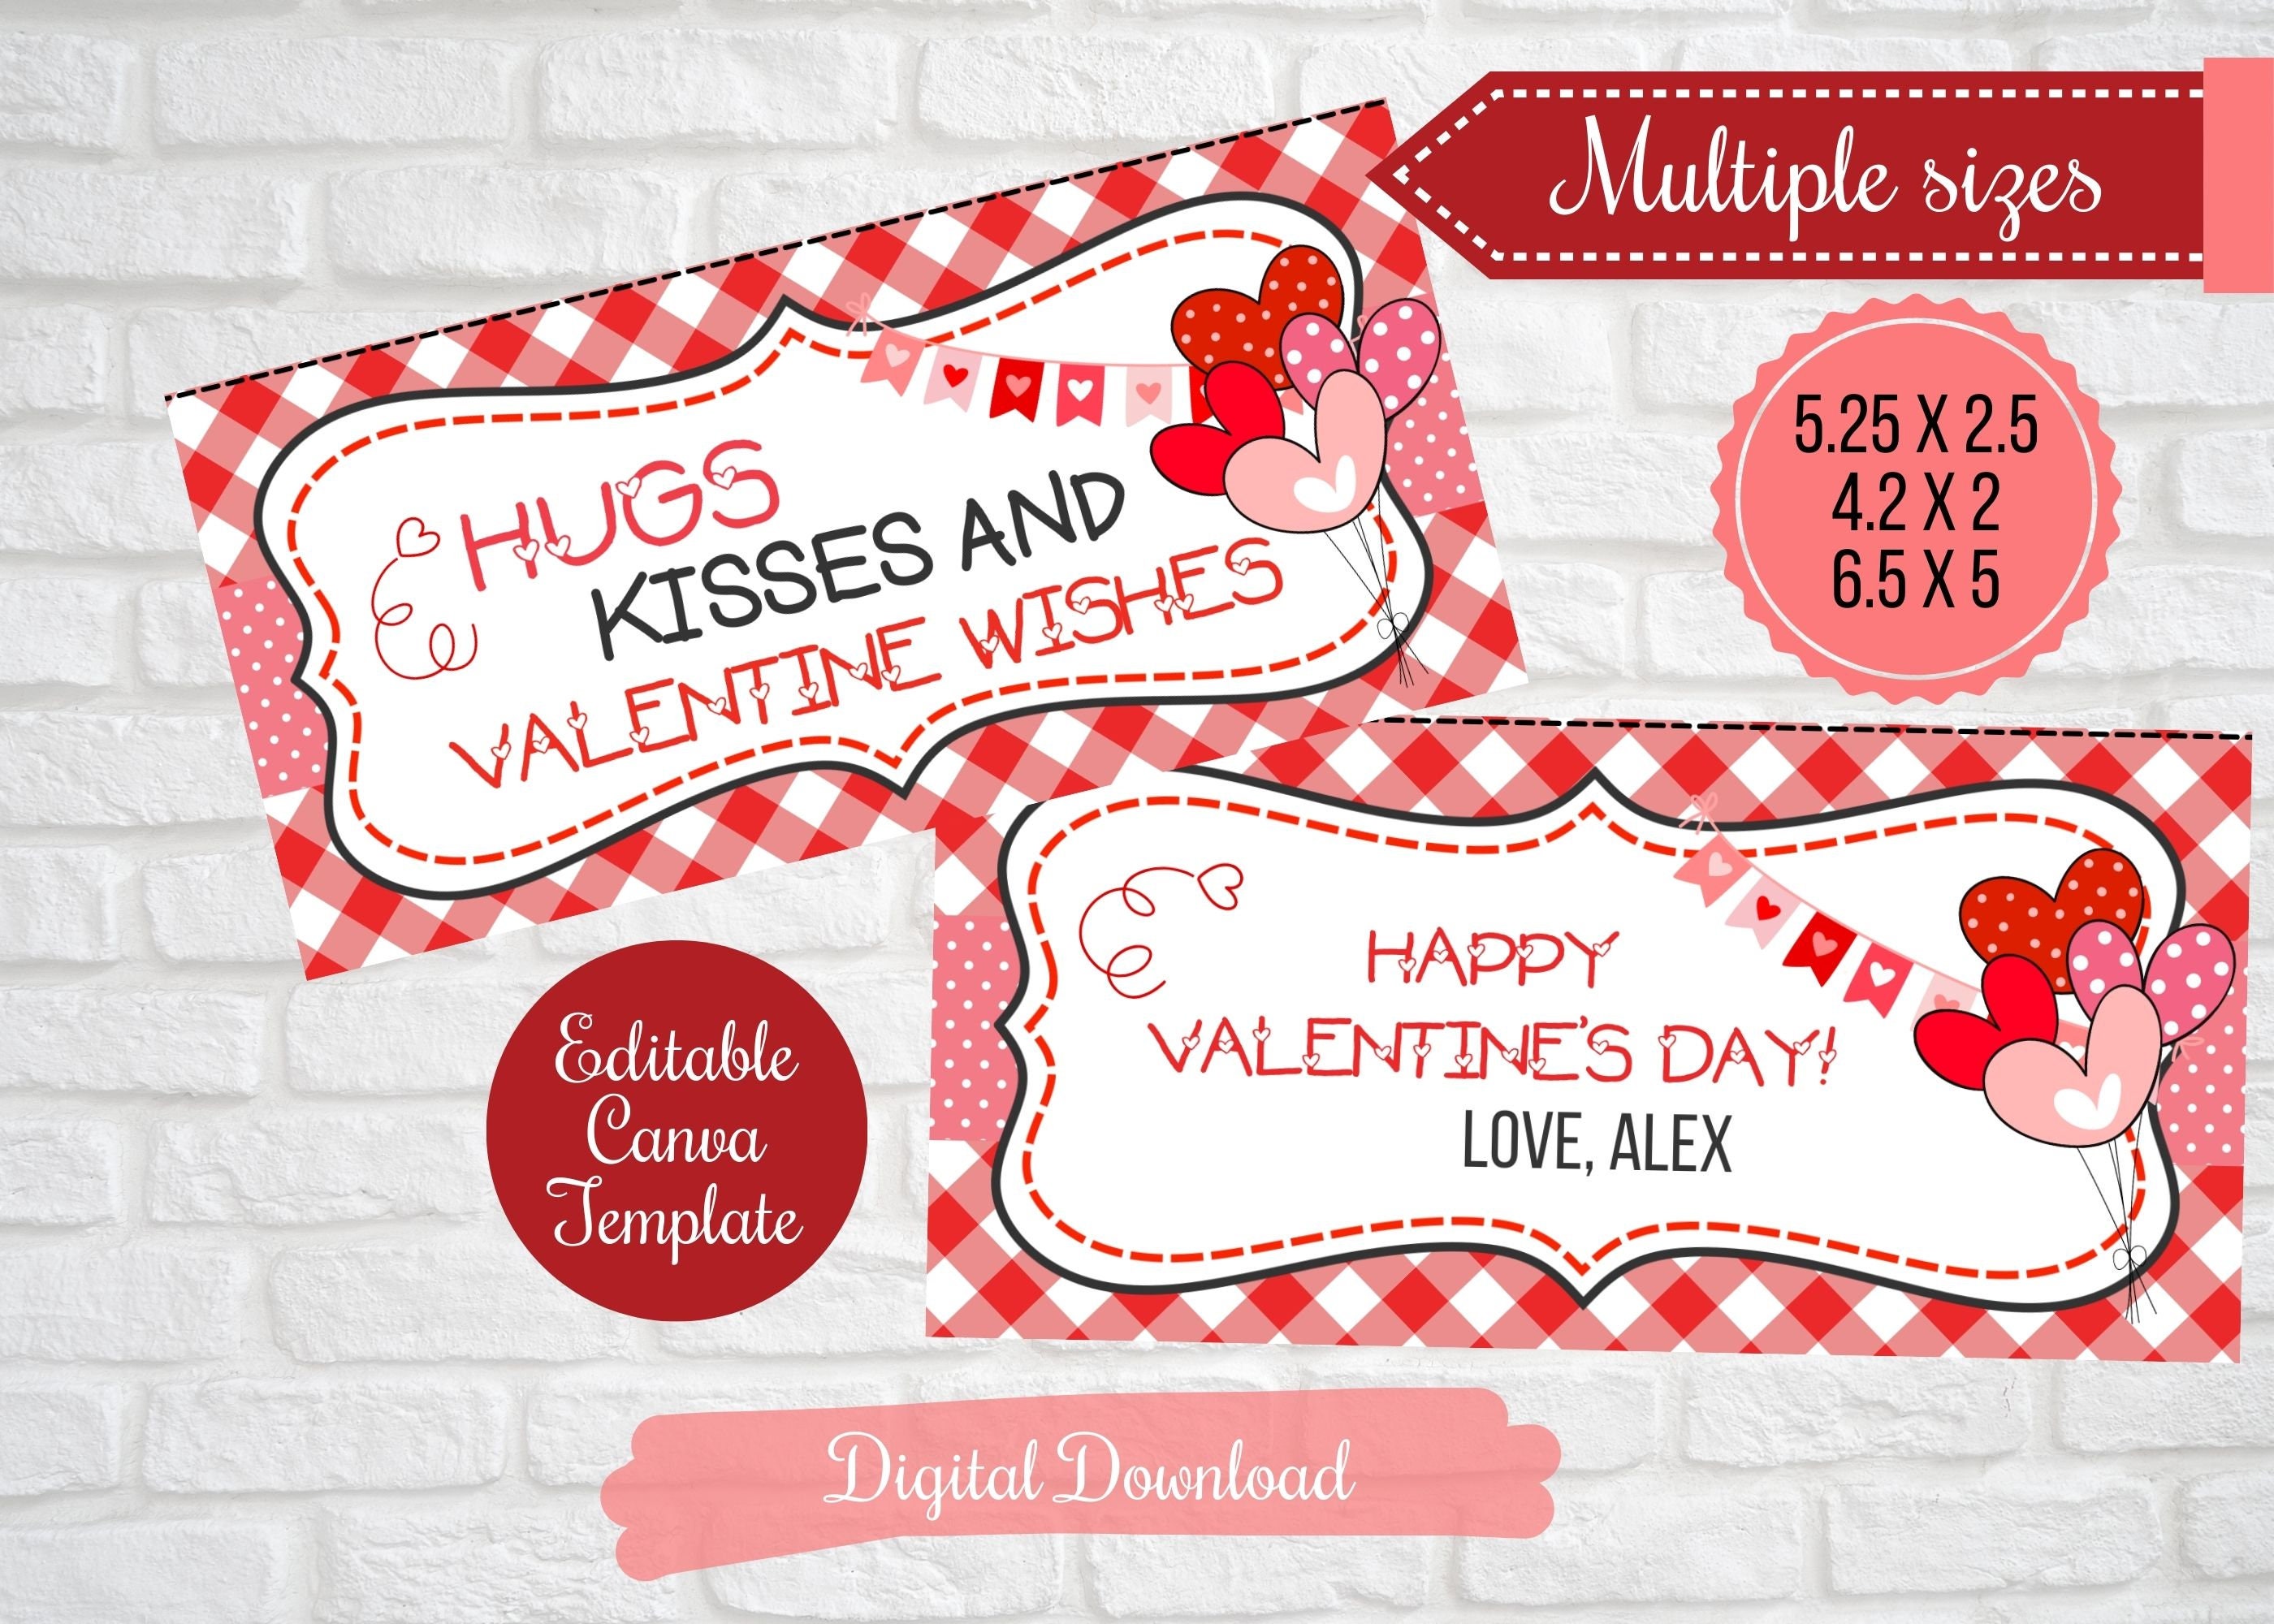 Valentines Stickers and Bags Choice of Kids Valentine Stickers, Clear  Cellophane Treat Bags, Valentine Favor Labels, Kids Valentines Ideas 